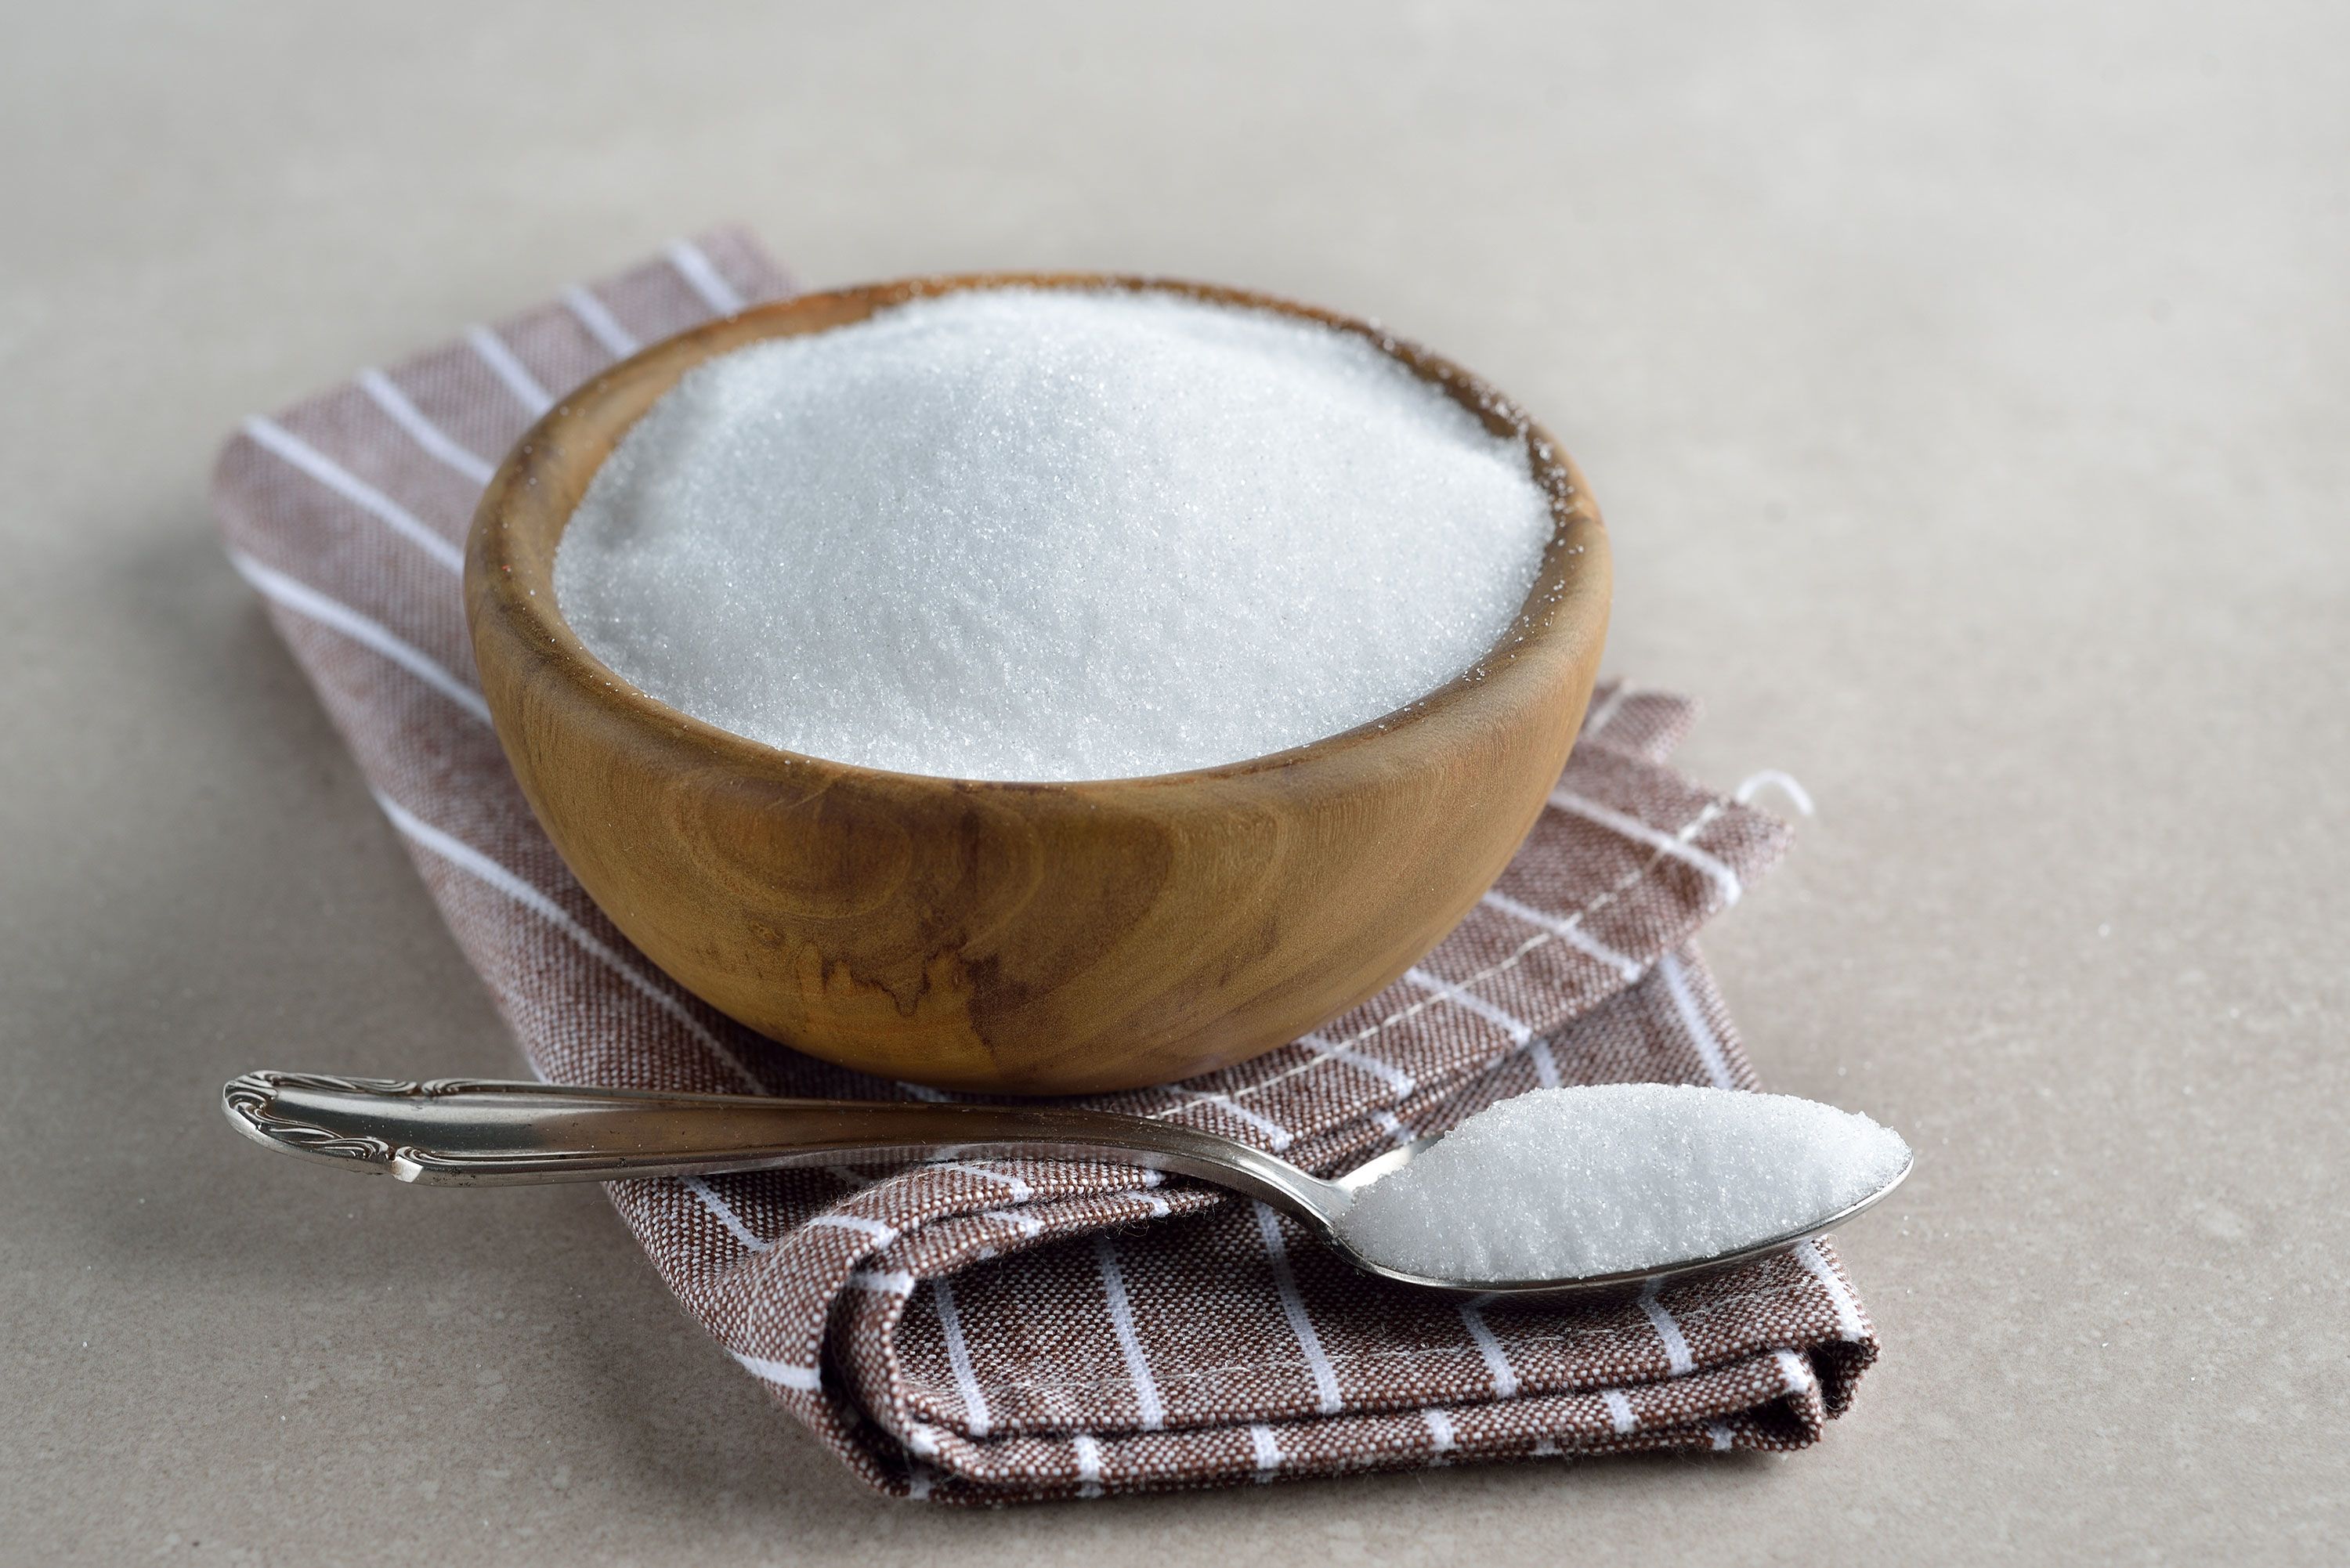 Erythritol, an ingredient in stevia, linked to heart attack and